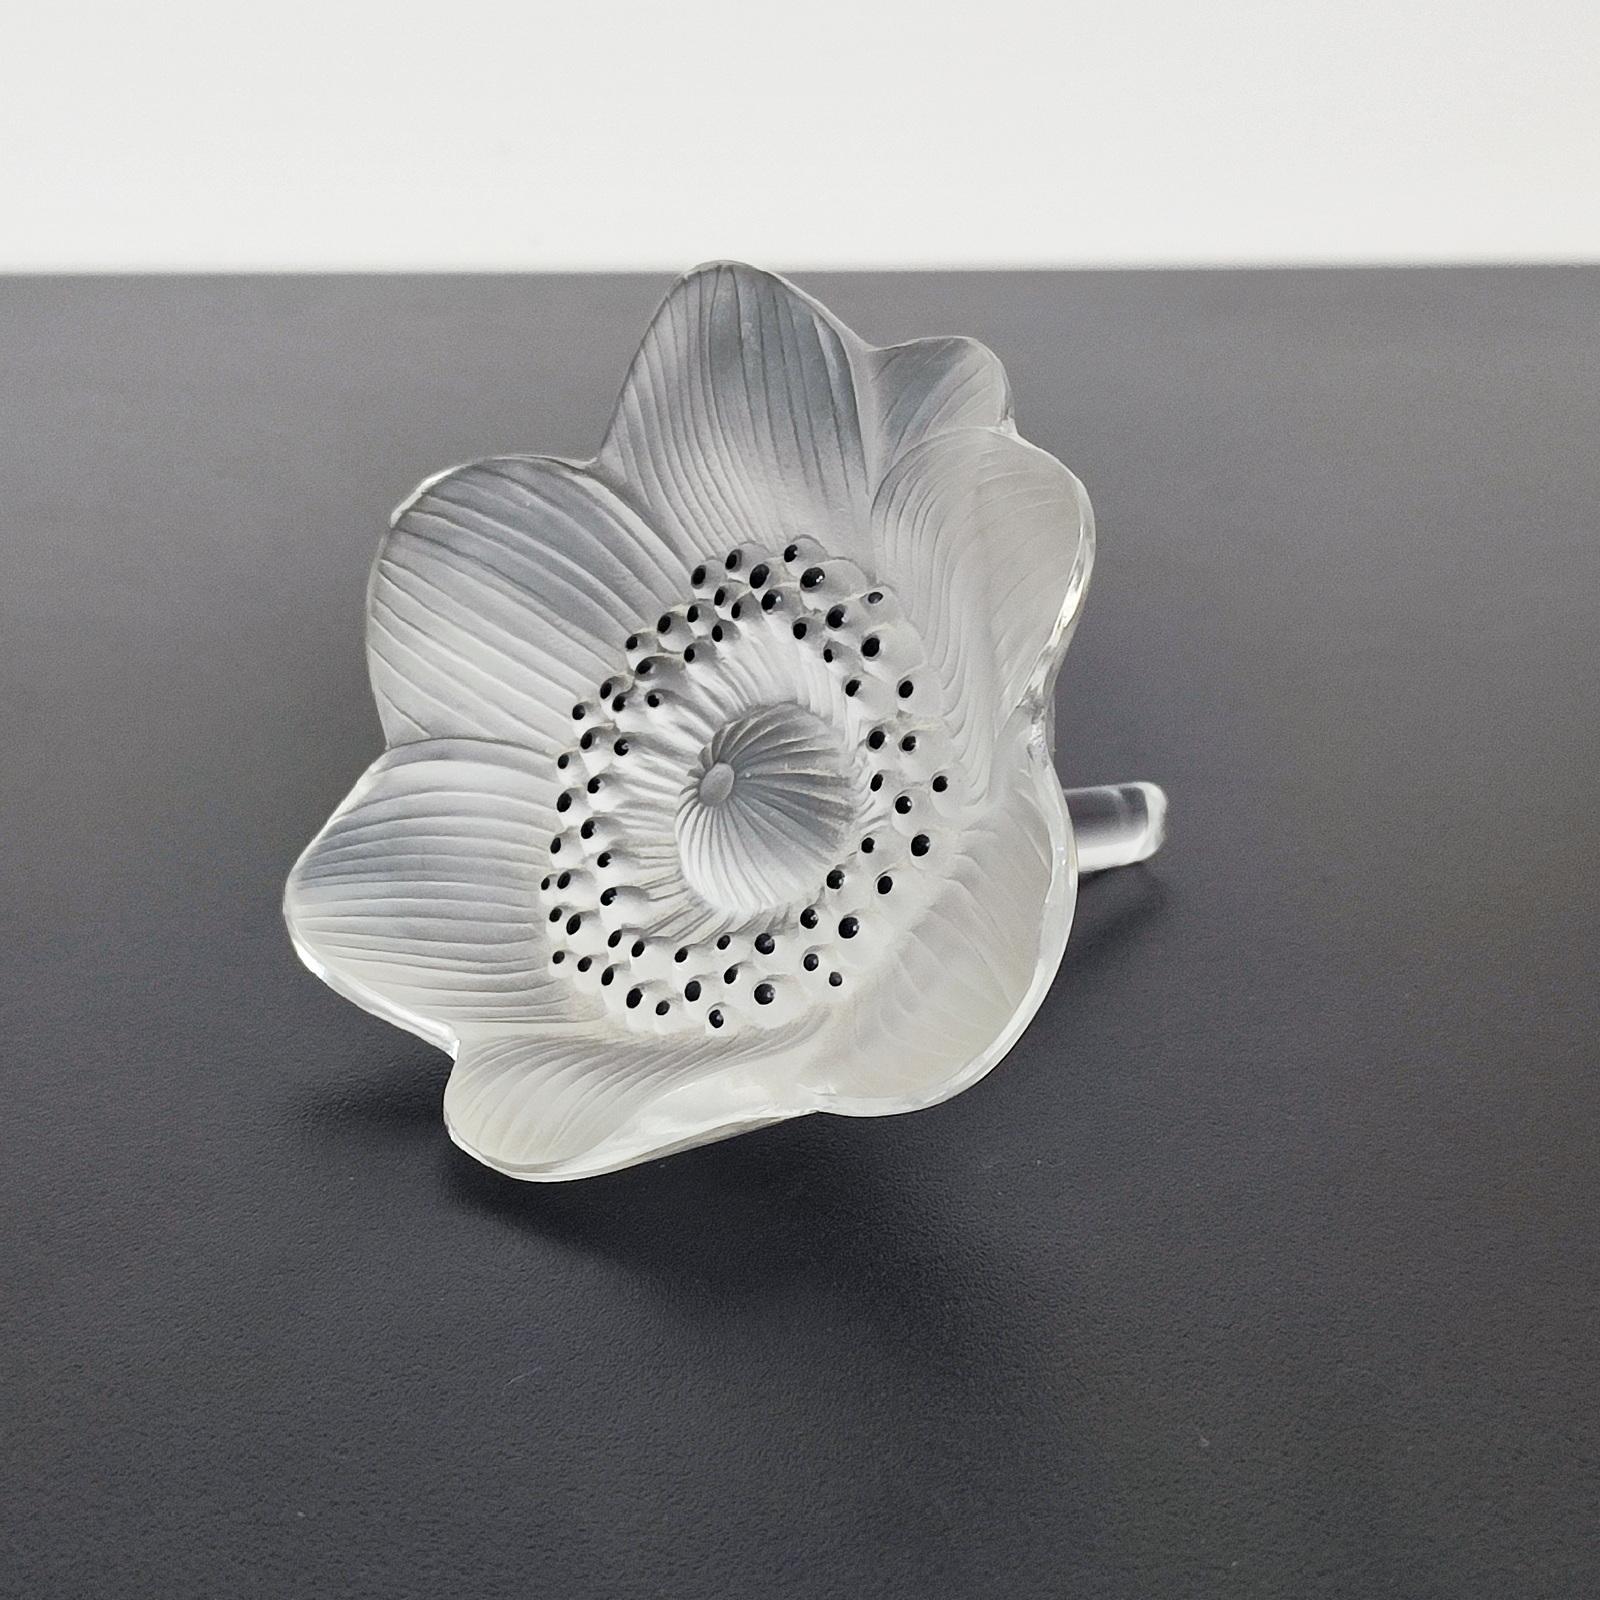 Art Deco Lalique France Vintage Anemone Flower Sculpture, Paperweight - FREE SHIPPING For Sale